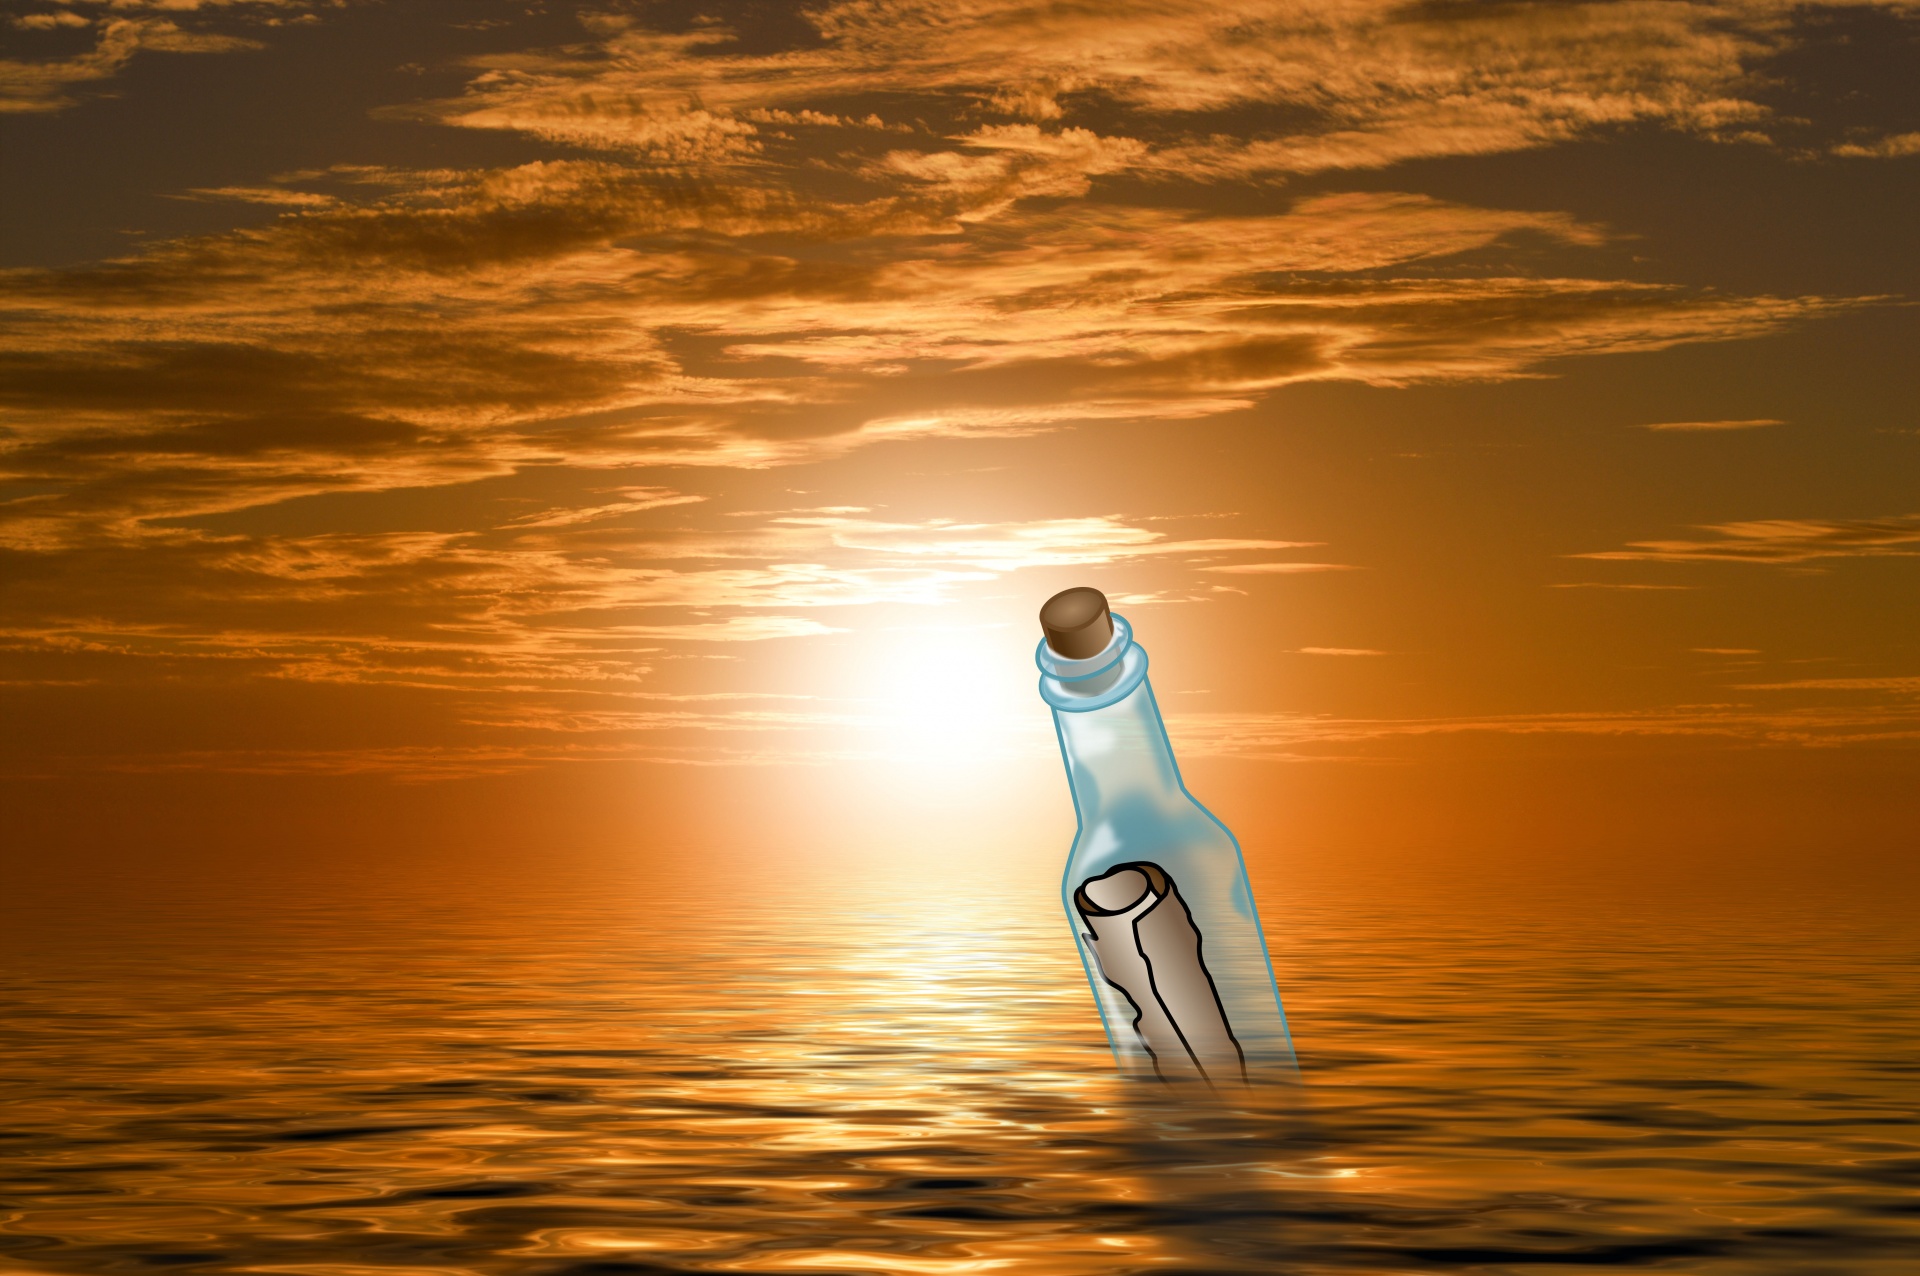 Message In The Bottle